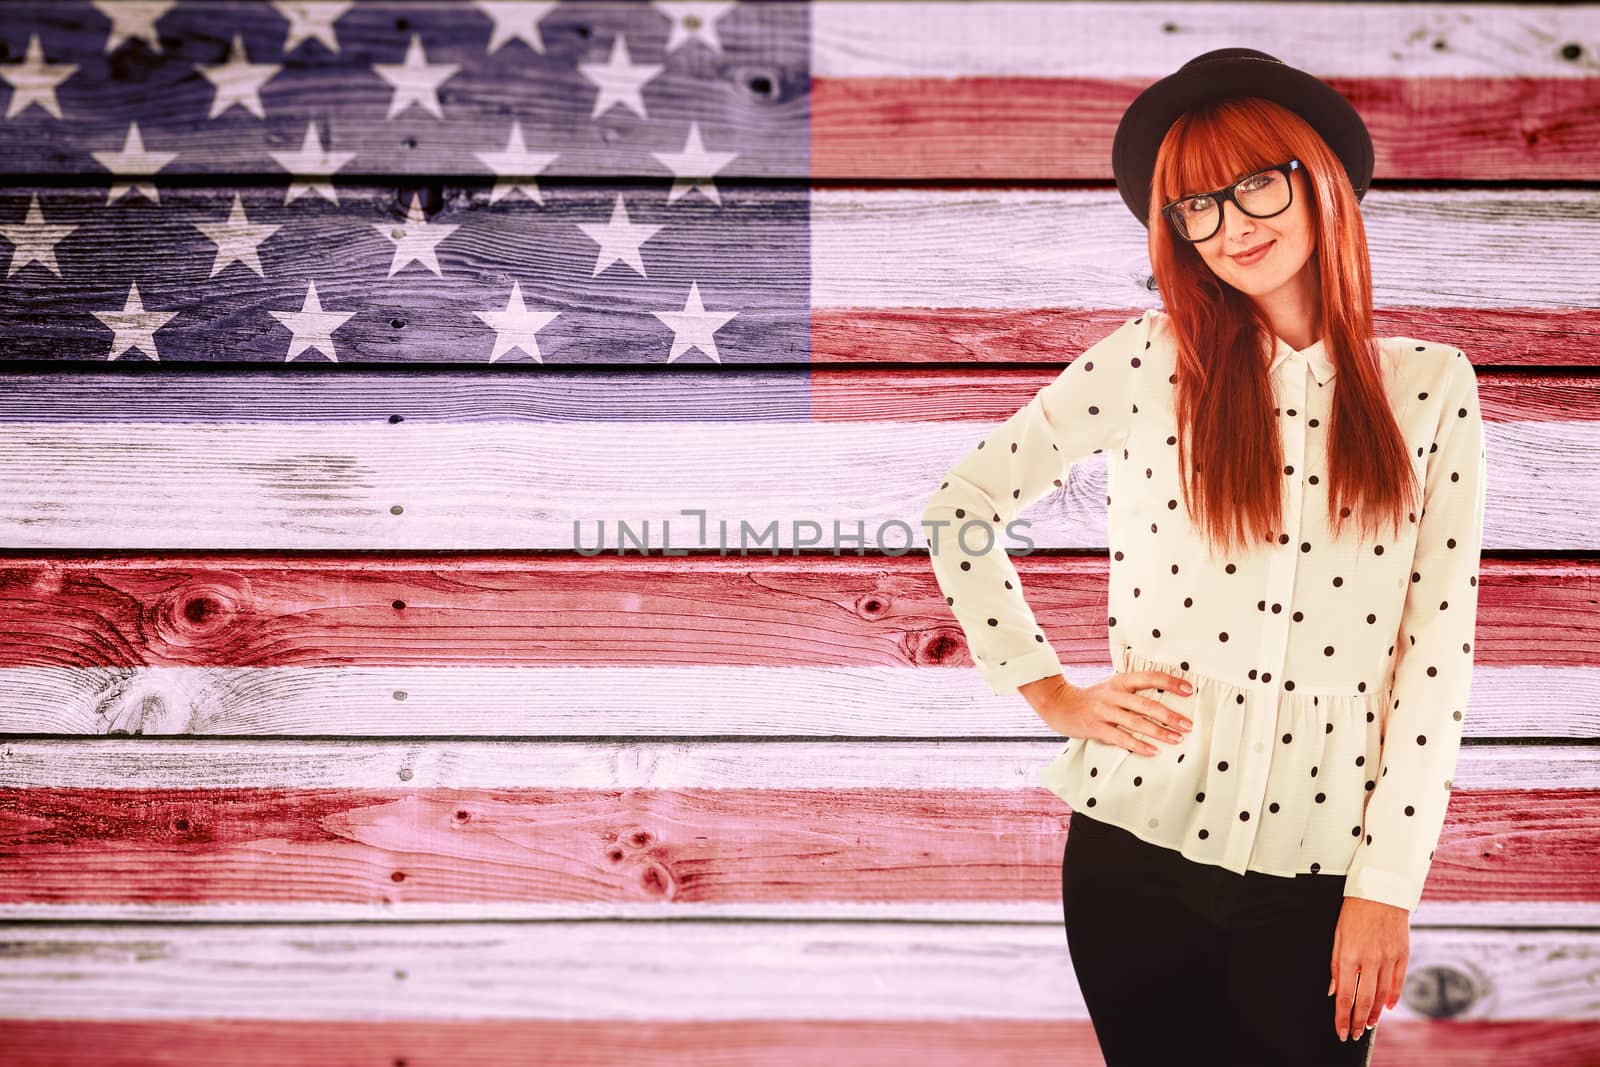 Composite image of portrait of a smiling hipster woman by Wavebreakmedia